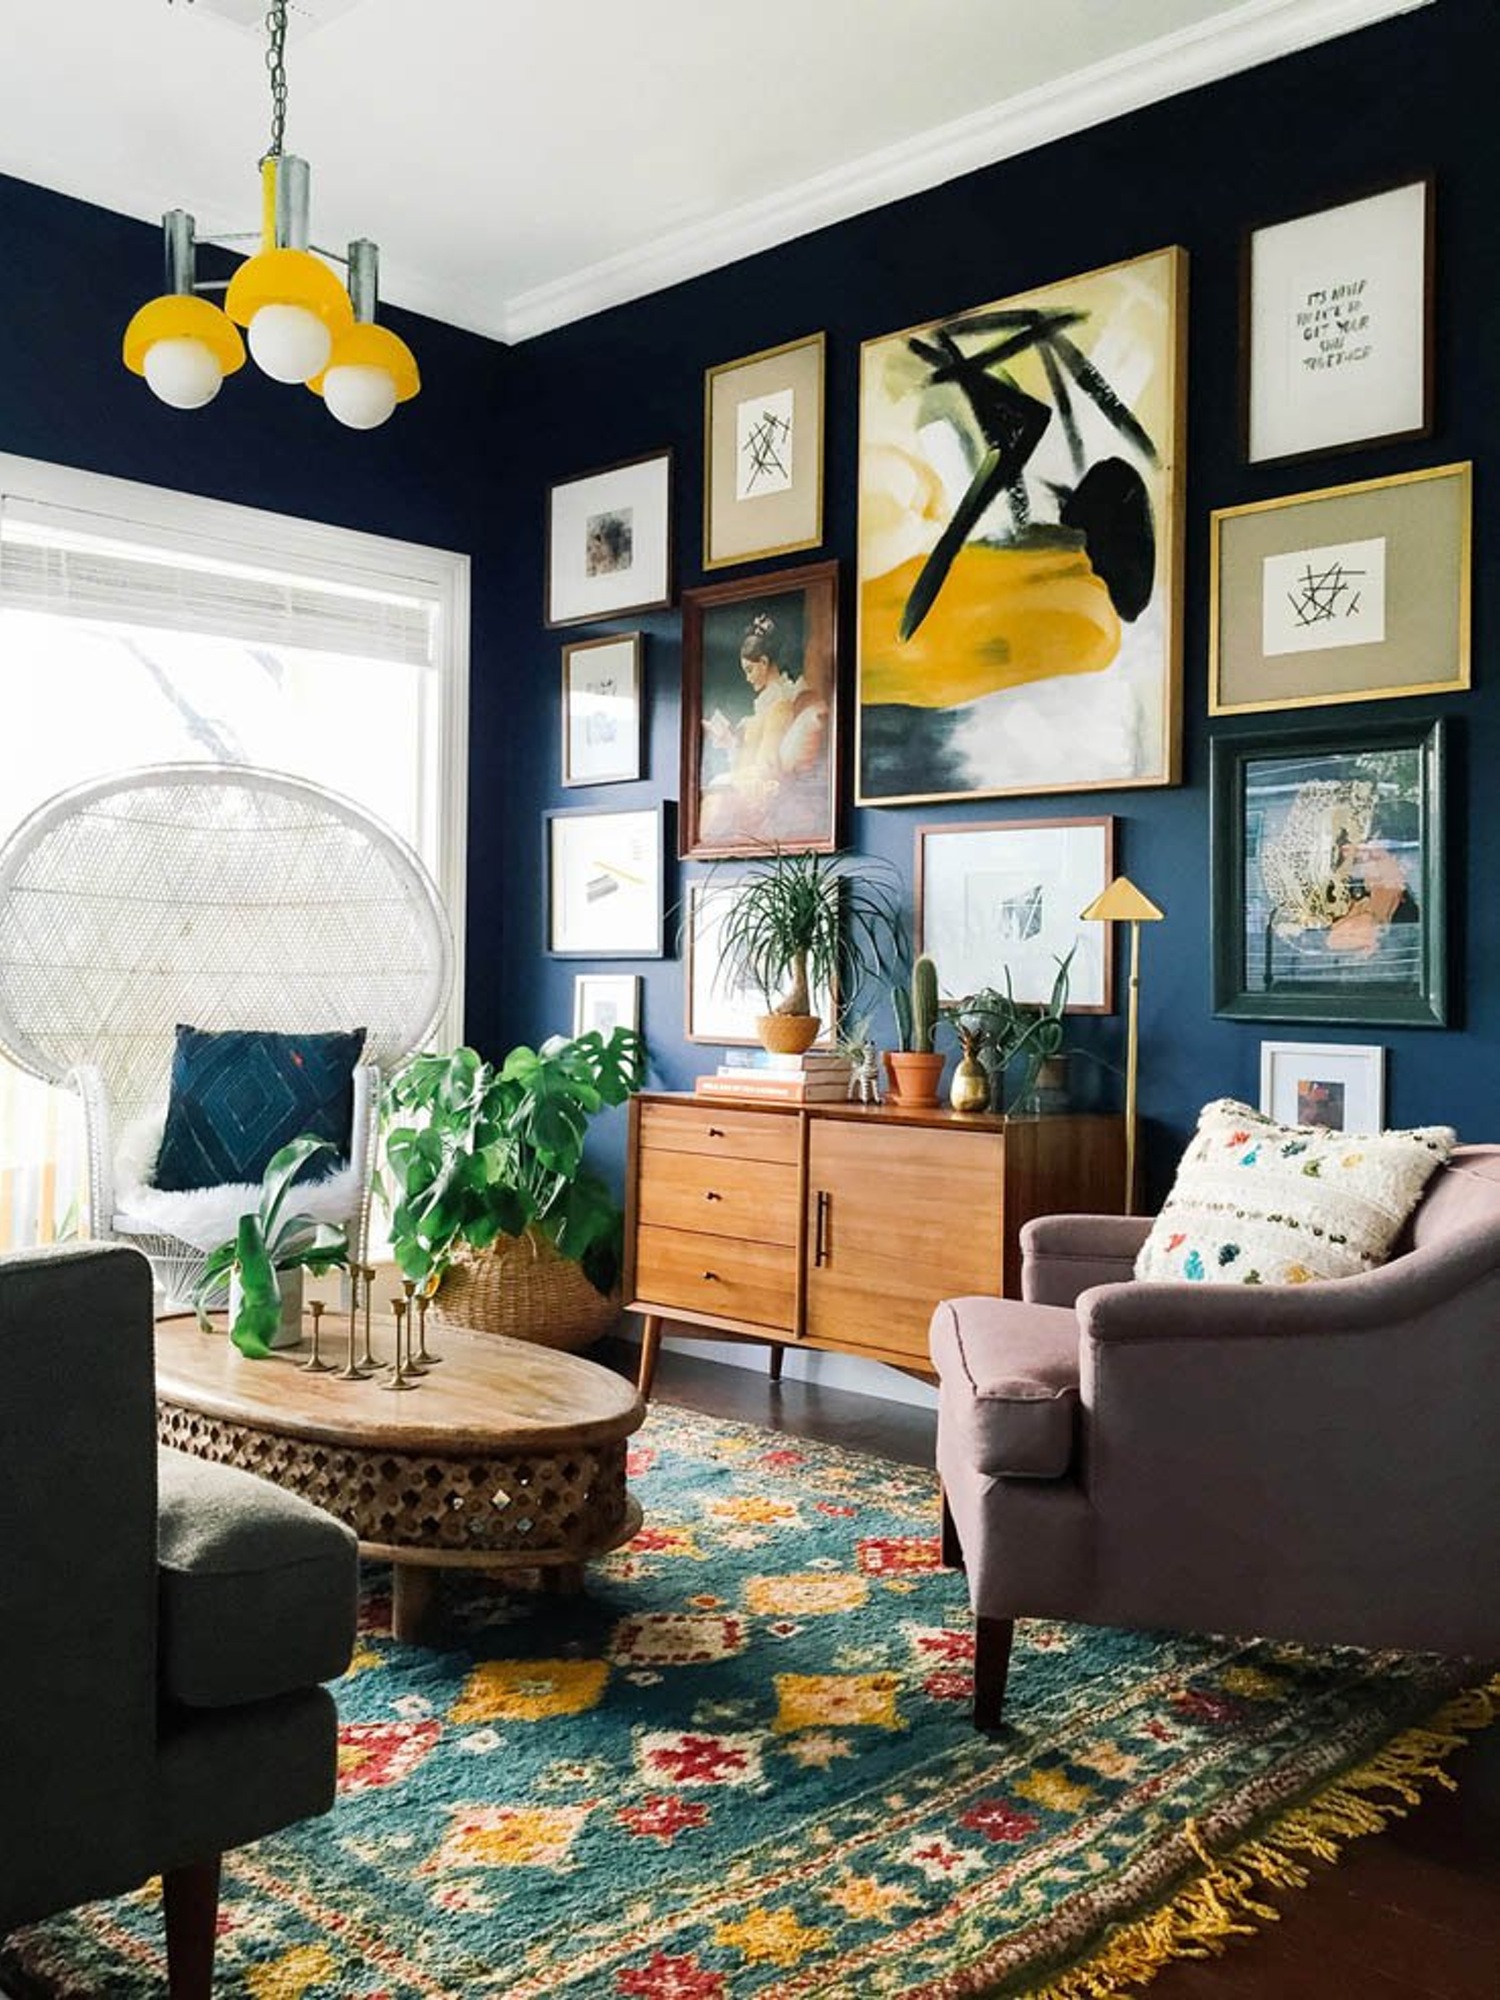 Make Way For Eclectic Home Décor